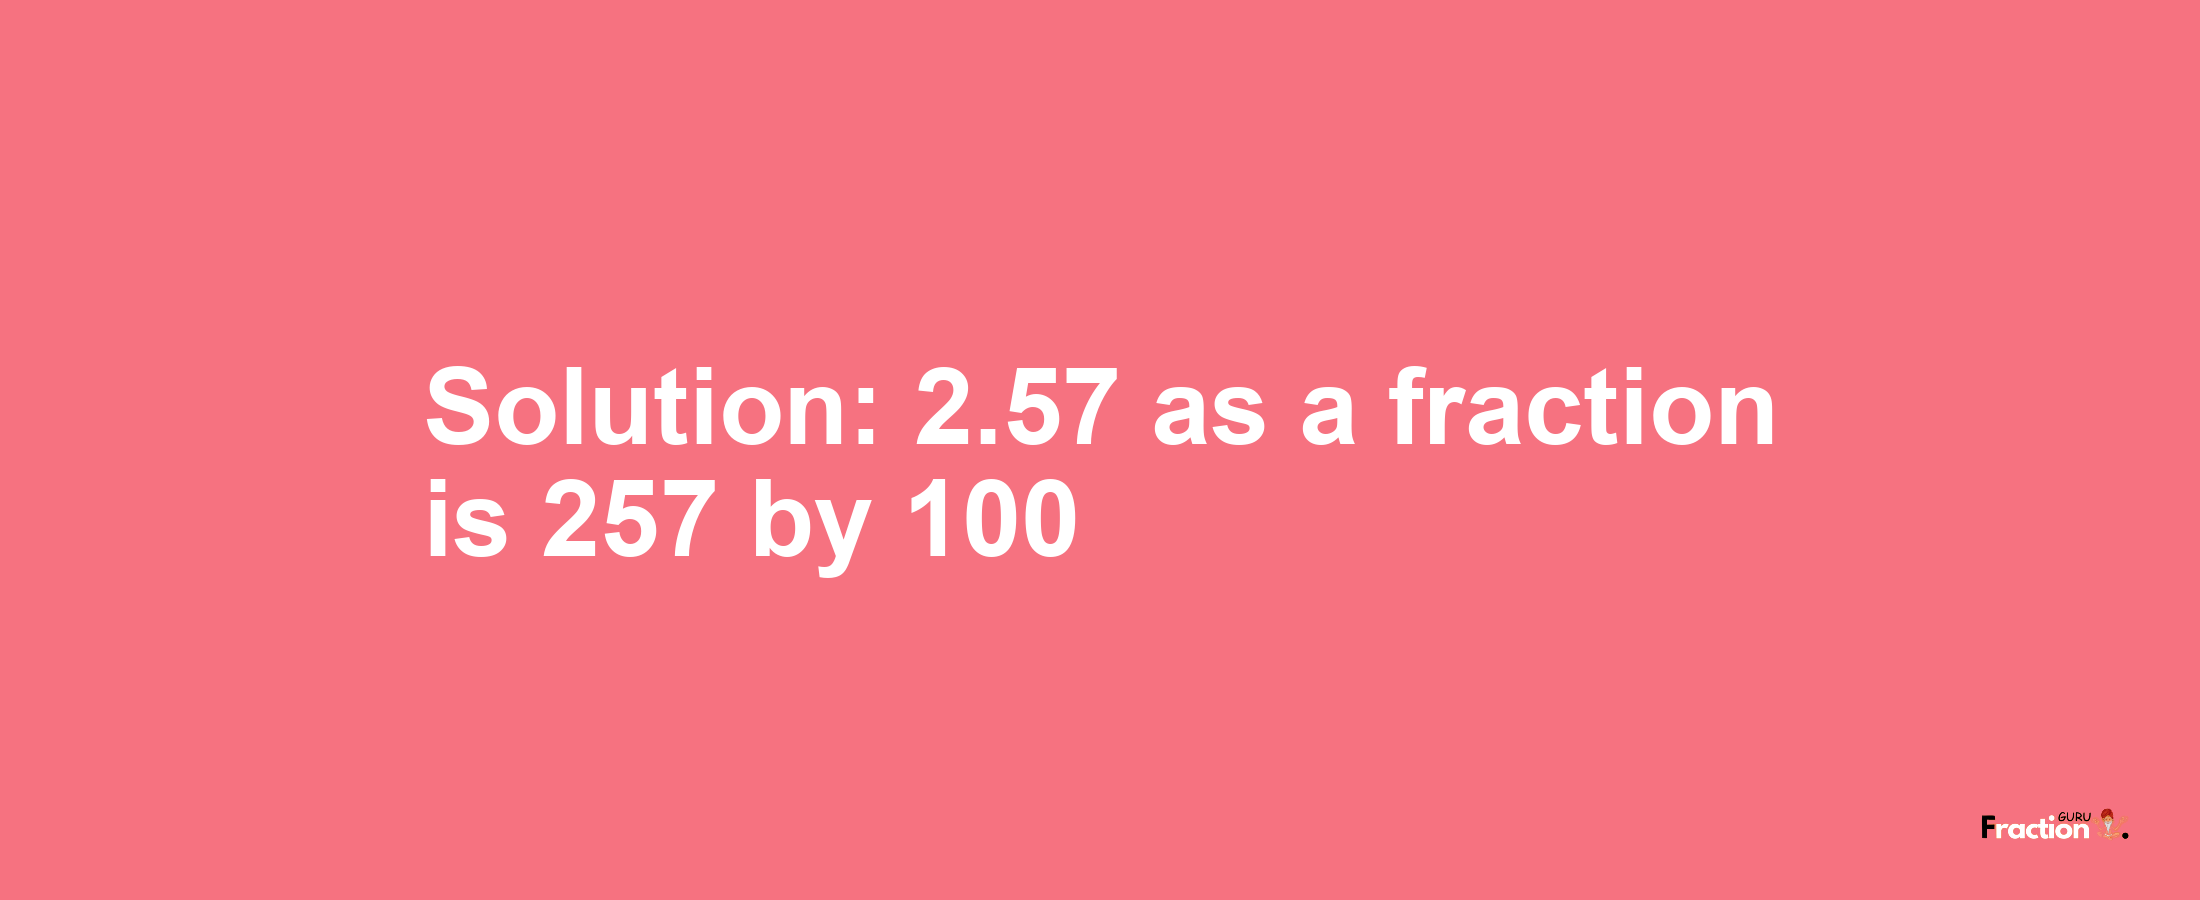 Solution:2.57 as a fraction is 257/100